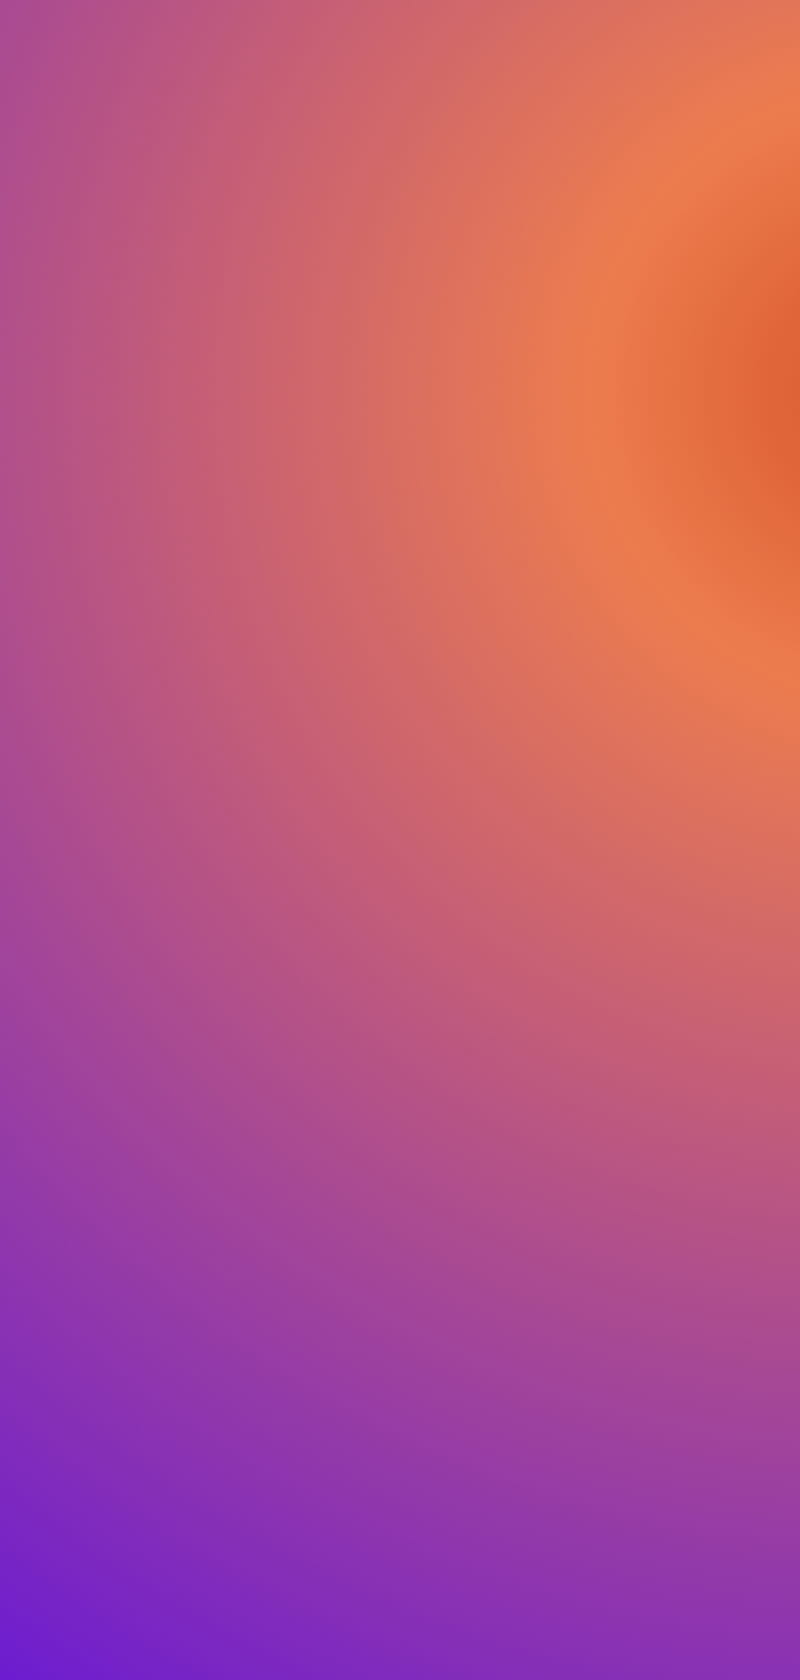 Orange Gradient, Aurel, abstract, amoled, android, art, aura, aurora, background, blue, blur, blurry, calm, color, colorful, colors, colours, cool, dark, fresh, ios, minimal, minimalistic, modern, new, nice, oled, quality, red, simple, wallpapper, HD phone wallpaper